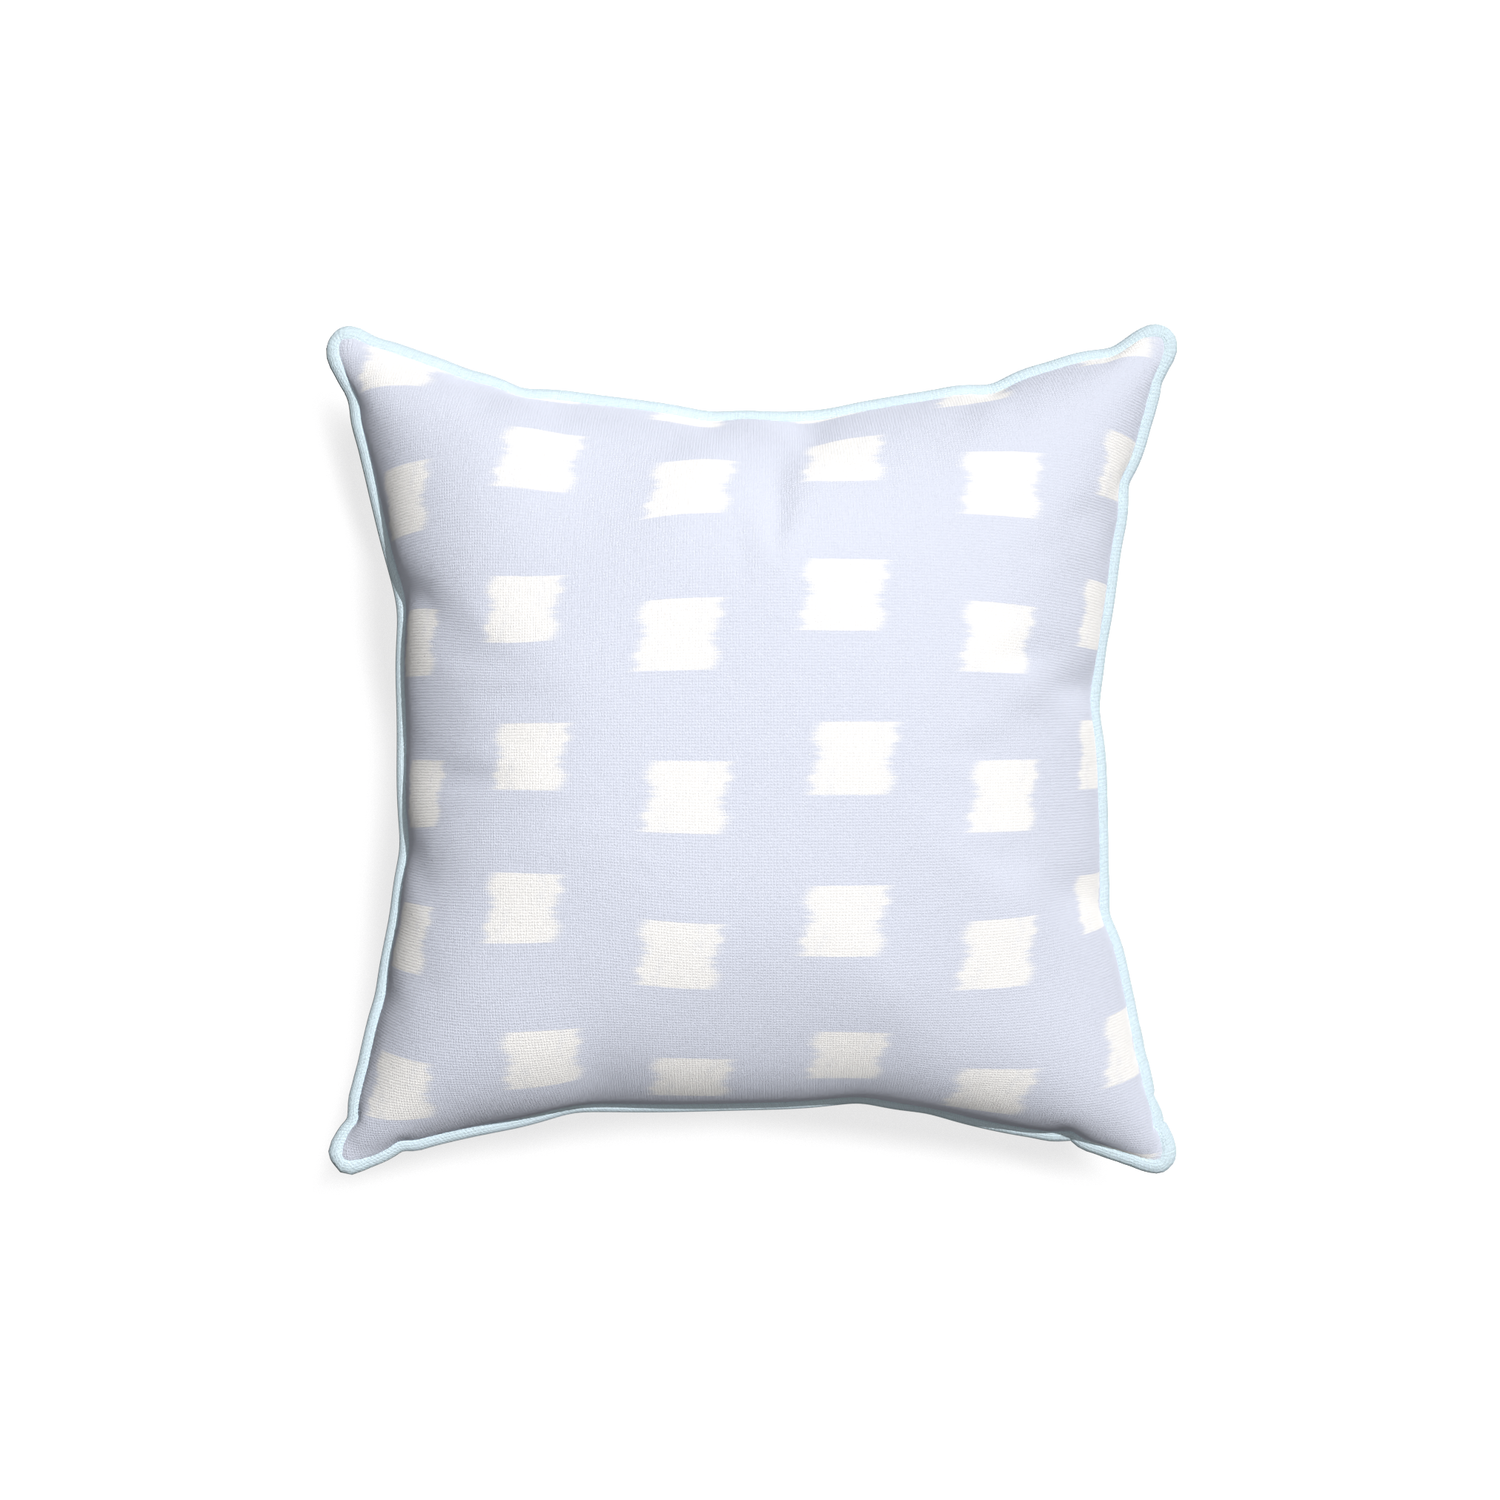 18-square denton custom pillow with powder piping on white background